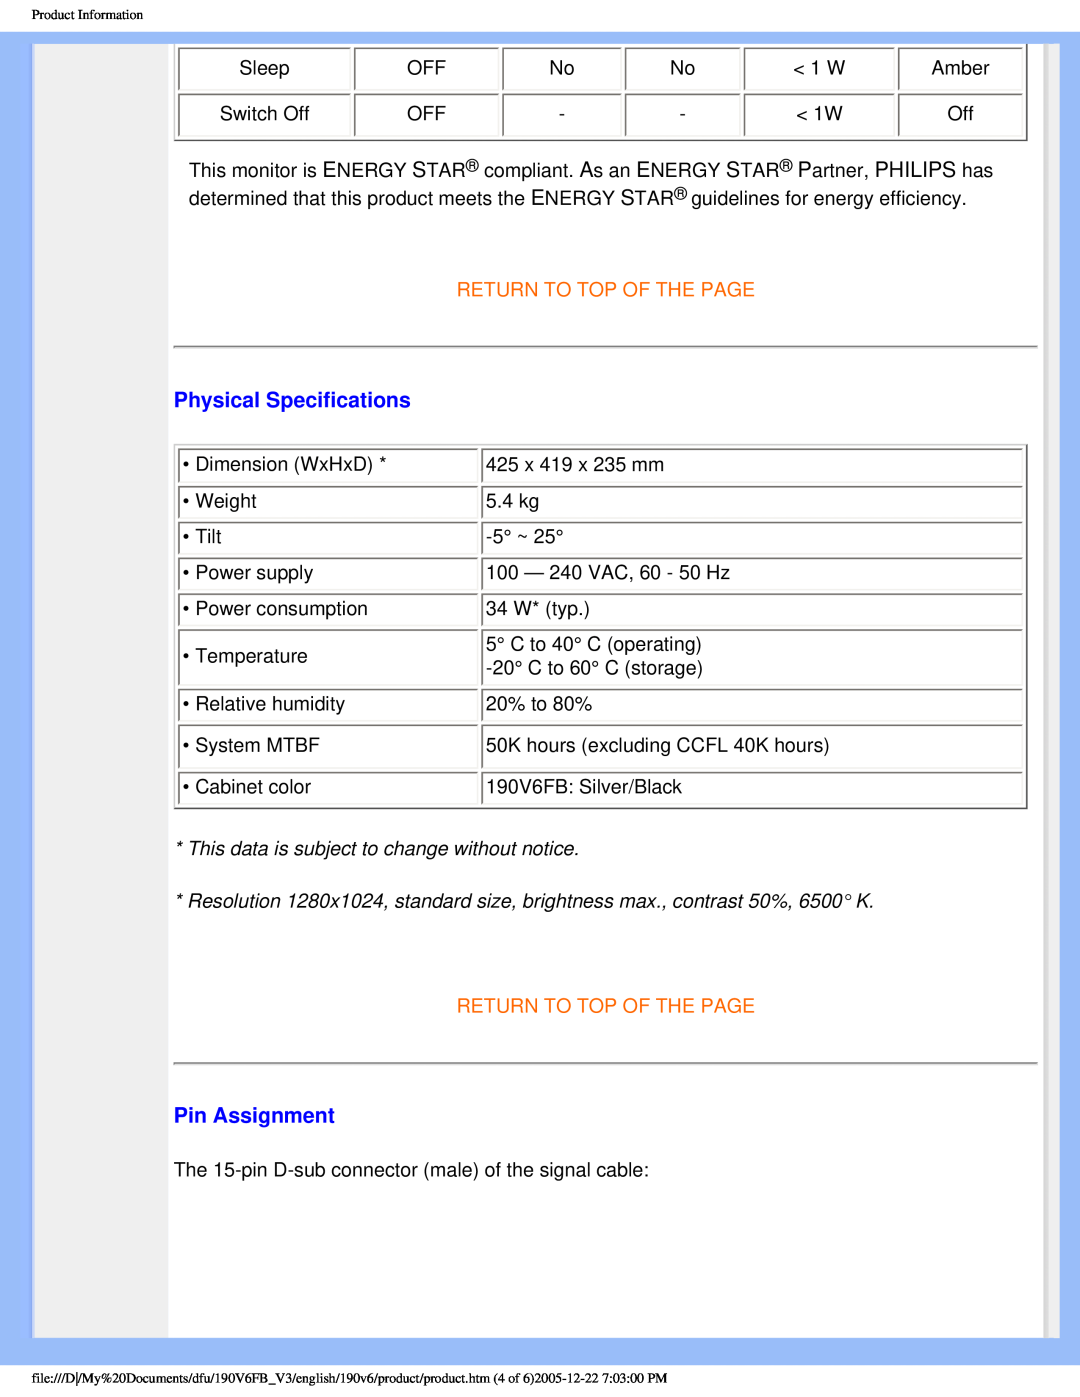 Philips 190V6FB user manual Physical Specifications, Pin Assignment, Return To Top Of The Page 